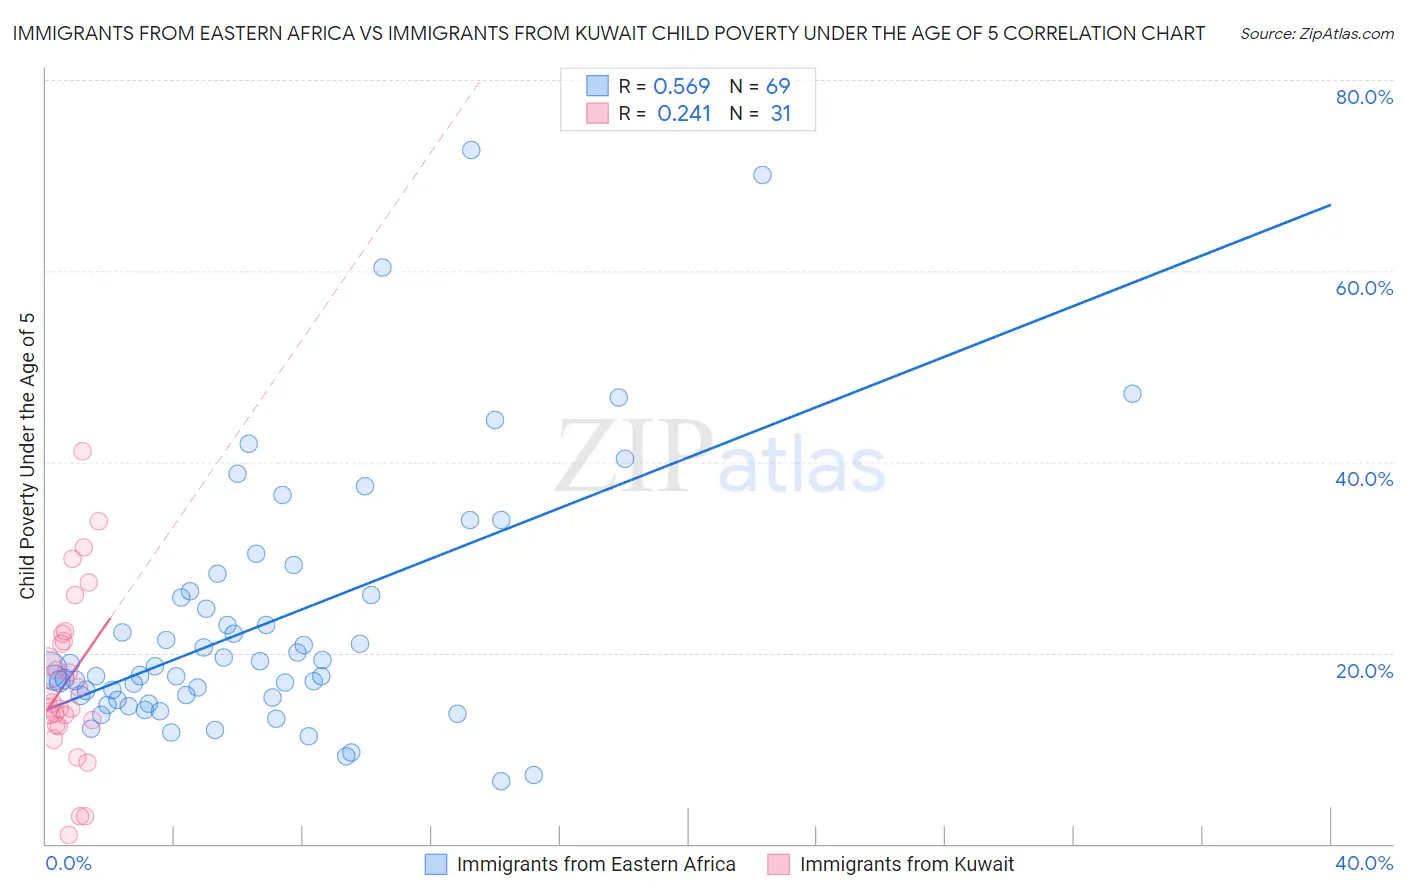 Immigrants from Eastern Africa vs Immigrants from Kuwait Child Poverty Under the Age of 5